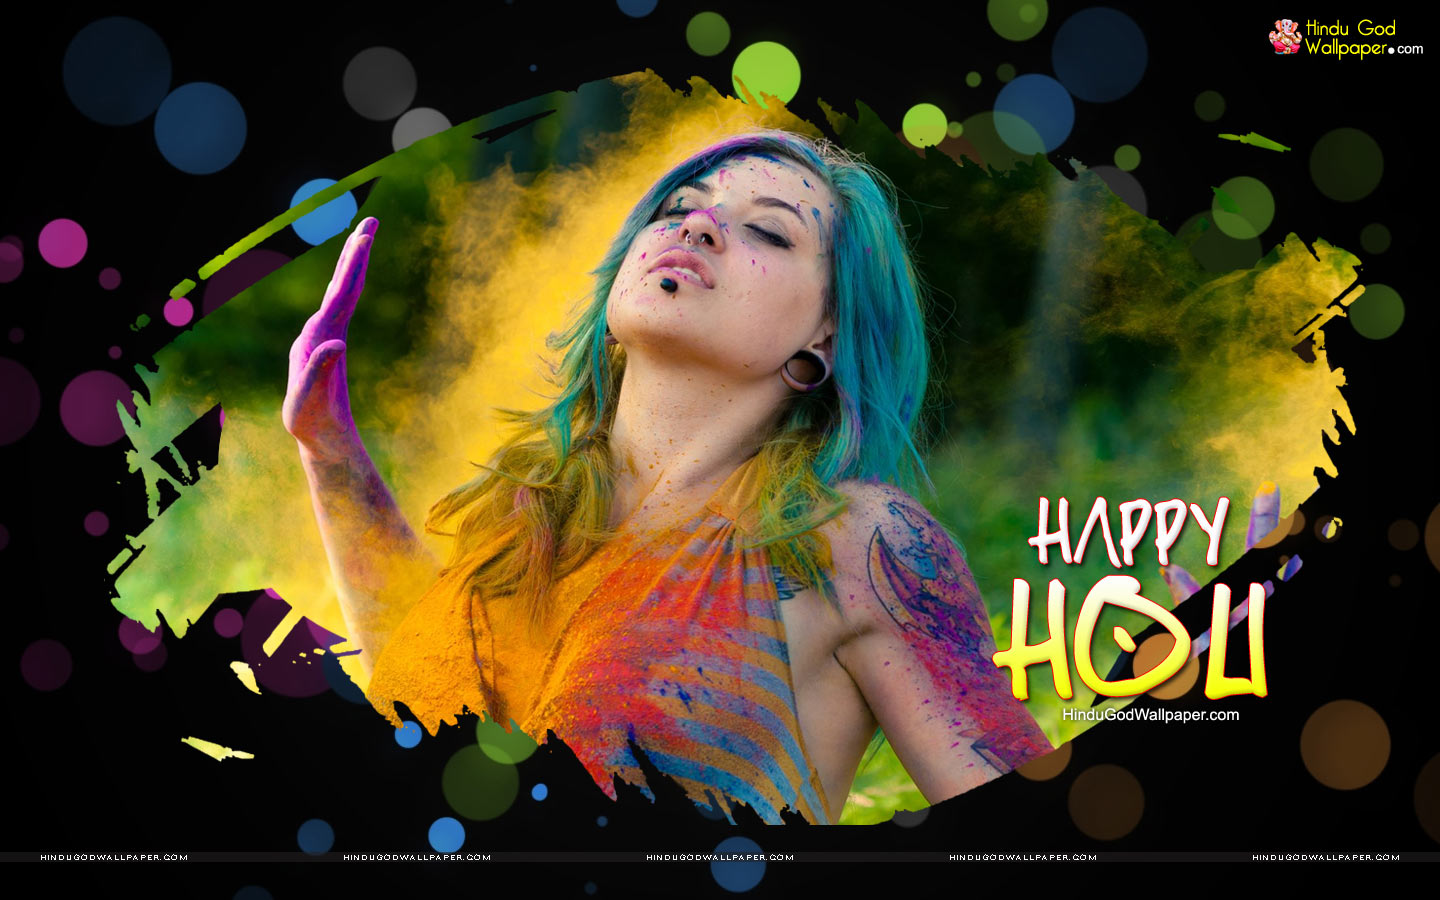 Latest Happy Holi Wallpapers, Image & Photos Download